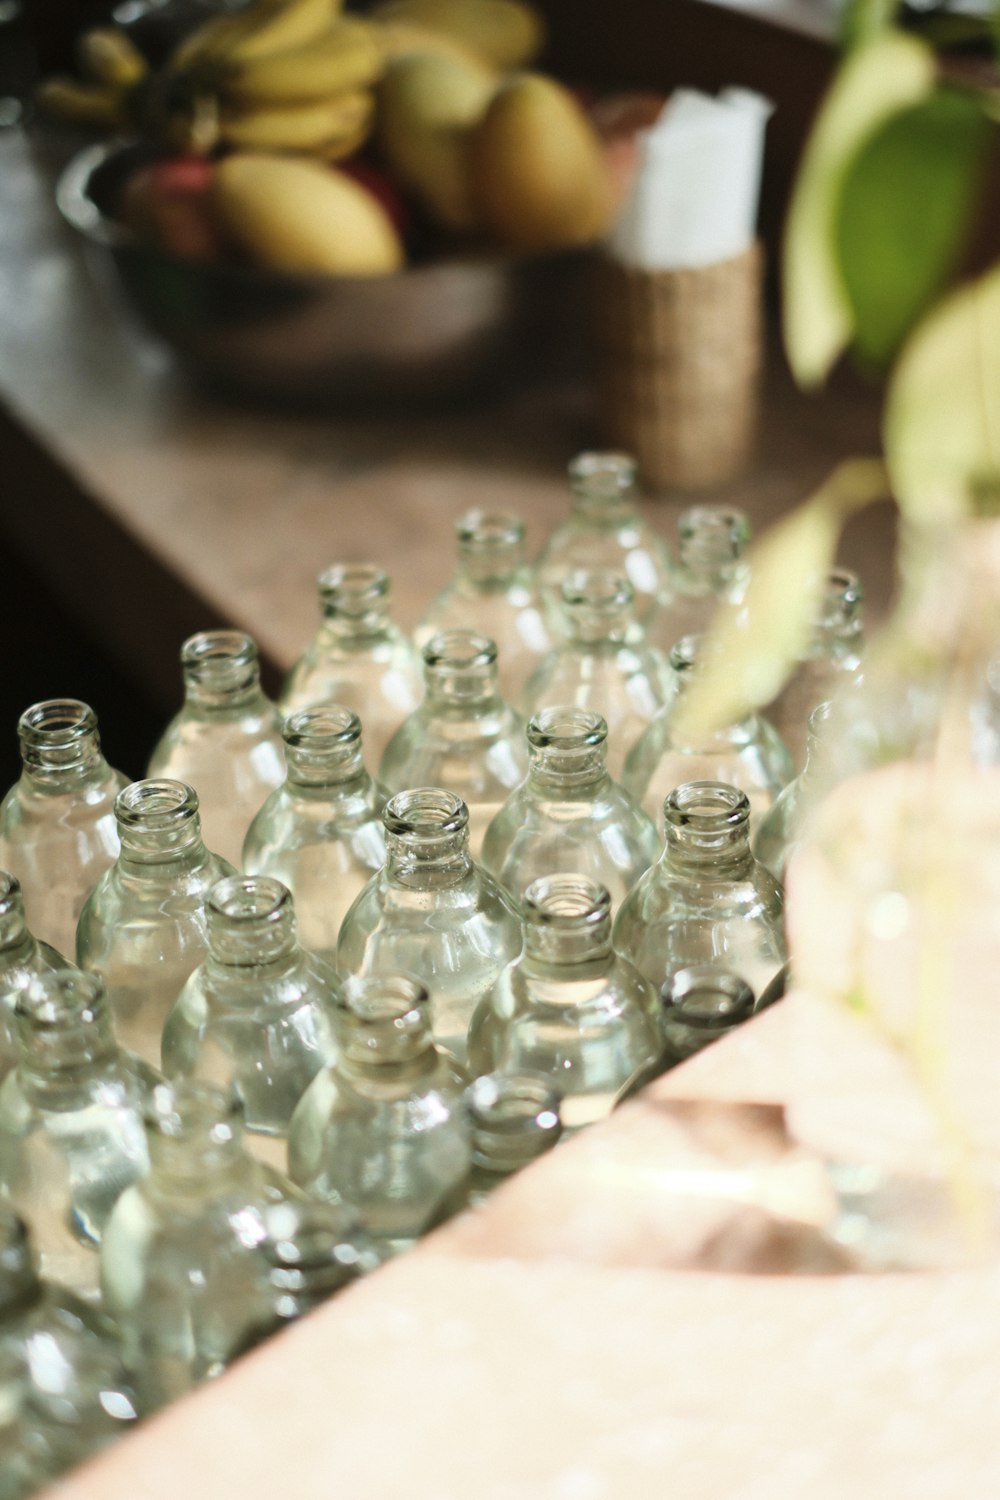 a bunch of empty glass bottles sitting on a table